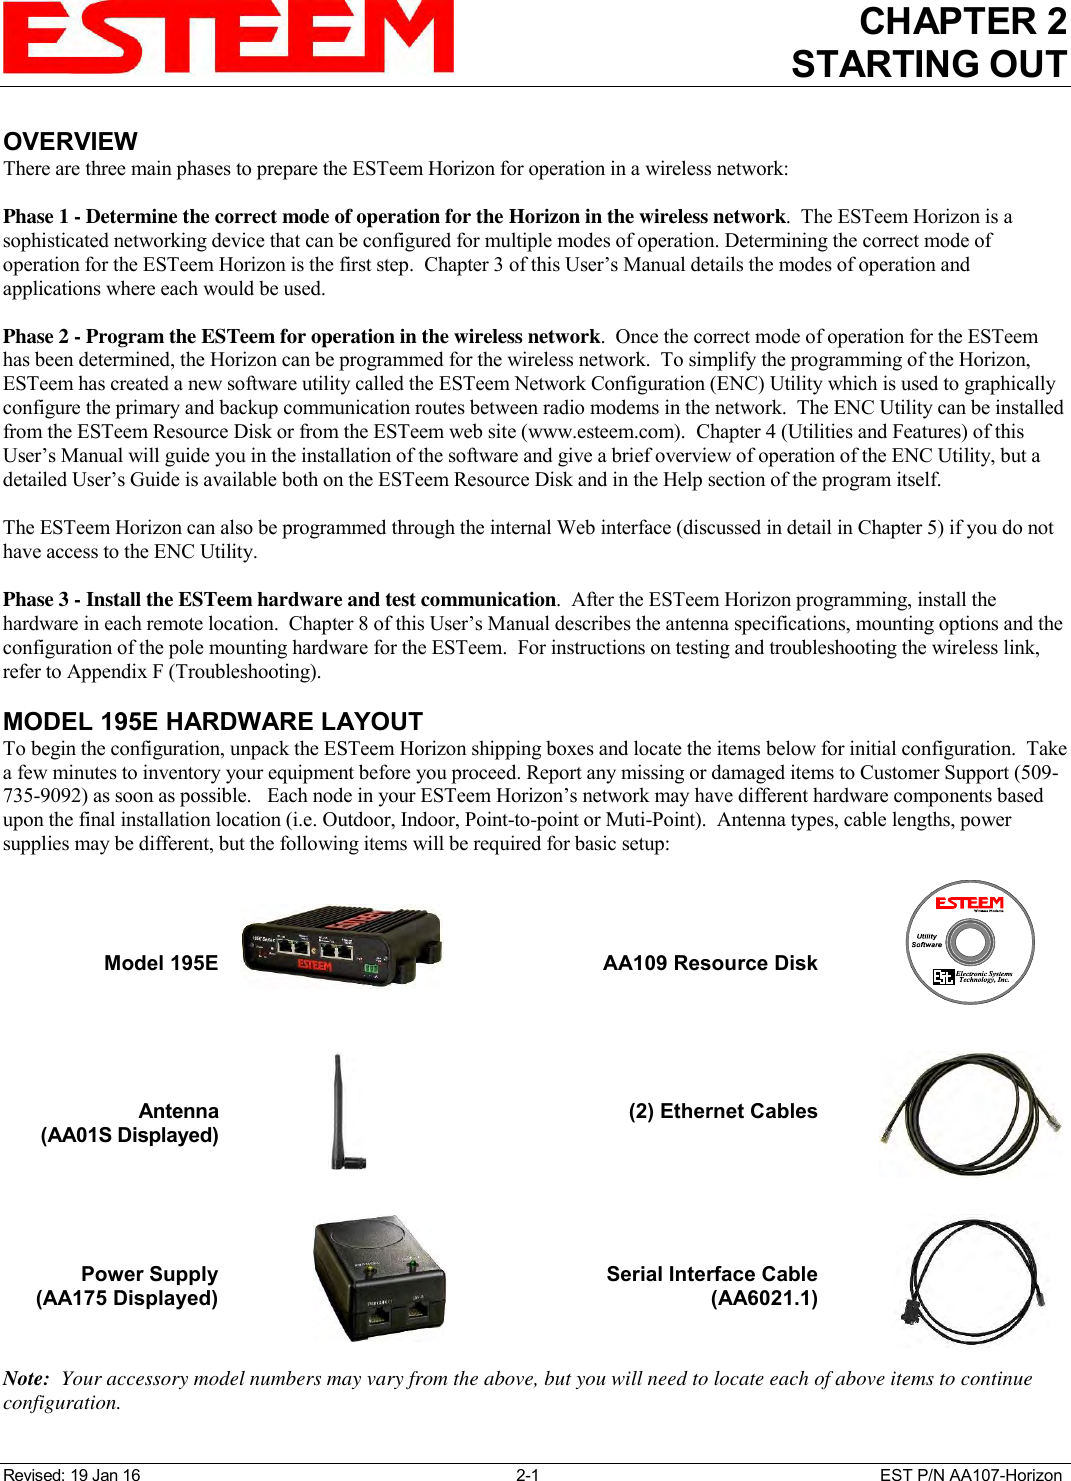 CHAPTER 2 STARTING OUT   Revised: 19 Jan 16  2-1  EST P/N AA107-Horizon OVERVIEW There are three main phases to prepare the ESTeem Horizon for operation in a wireless network:  Phase 1 - Determine the correct mode of operation for the Horizon in the wireless network.  The ESTeem Horizon is a sophisticated networking device that can be configured for multiple modes of operation. Determining the correct mode of operation for the ESTeem Horizon is the first step.  Chapter 3 of this User’s Manual details the modes of operation and applications where each would be used.  Phase 2 - Program the ESTeem for operation in the wireless network.  Once the correct mode of operation for the ESTeem has been determined, the Horizon can be programmed for the wireless network.  To simplify the programming of the Horizon, ESTeem has created a new software utility called the ESTeem Network Configuration (ENC) Utility which is used to graphically configure the primary and backup communication routes between radio modems in the network.  The ENC Utility can be installed from the ESTeem Resource Disk or from the ESTeem web site (www.esteem.com).  Chapter 4 (Utilities and Features) of this User’s Manual will guide you in the installation of the software and give a brief overview of operation of the ENC Utility, but a detailed User’s Guide is available both on the ESTeem Resource Disk and in the Help section of the program itself.  The ESTeem Horizon can also be programmed through the internal Web interface (discussed in detail in Chapter 5) if you do not have access to the ENC Utility.  Phase 3 - Install the ESTeem hardware and test communication.  After the ESTeem Horizon programming, install the hardware in each remote location.  Chapter 8 of this User’s Manual describes the antenna specifications, mounting options and the configuration of the pole mounting hardware for the ESTeem.  For instructions on testing and troubleshooting the wireless link, refer to Appendix F (Troubleshooting).    MODEL 195E HARDWARE LAYOUT To begin the configuration, unpack the ESTeem Horizon shipping boxes and locate the items below for initial configuration.  Take a few minutes to inventory your equipment before you proceed. Report any missing or damaged items to Customer Support (509-735-9092) as soon as possible.   Each node in your ESTeem Horizon’s network may have different hardware components based upon the final installation location (i.e. Outdoor, Indoor, Point-to-point or Muti-Point).  Antenna types, cable lengths, power supplies may be different, but the following items will be required for basic setup:     Model 195E      AA109 Resource Disk        Antenna  (AA01S Displayed)                    (2) Ethernet Cables        Power Supply (AA175 Displayed)    Serial Interface Cable (AA6021.1)  Note:  Your accessory model numbers may vary from the above, but you will need to locate each of above items to continue configuration.    